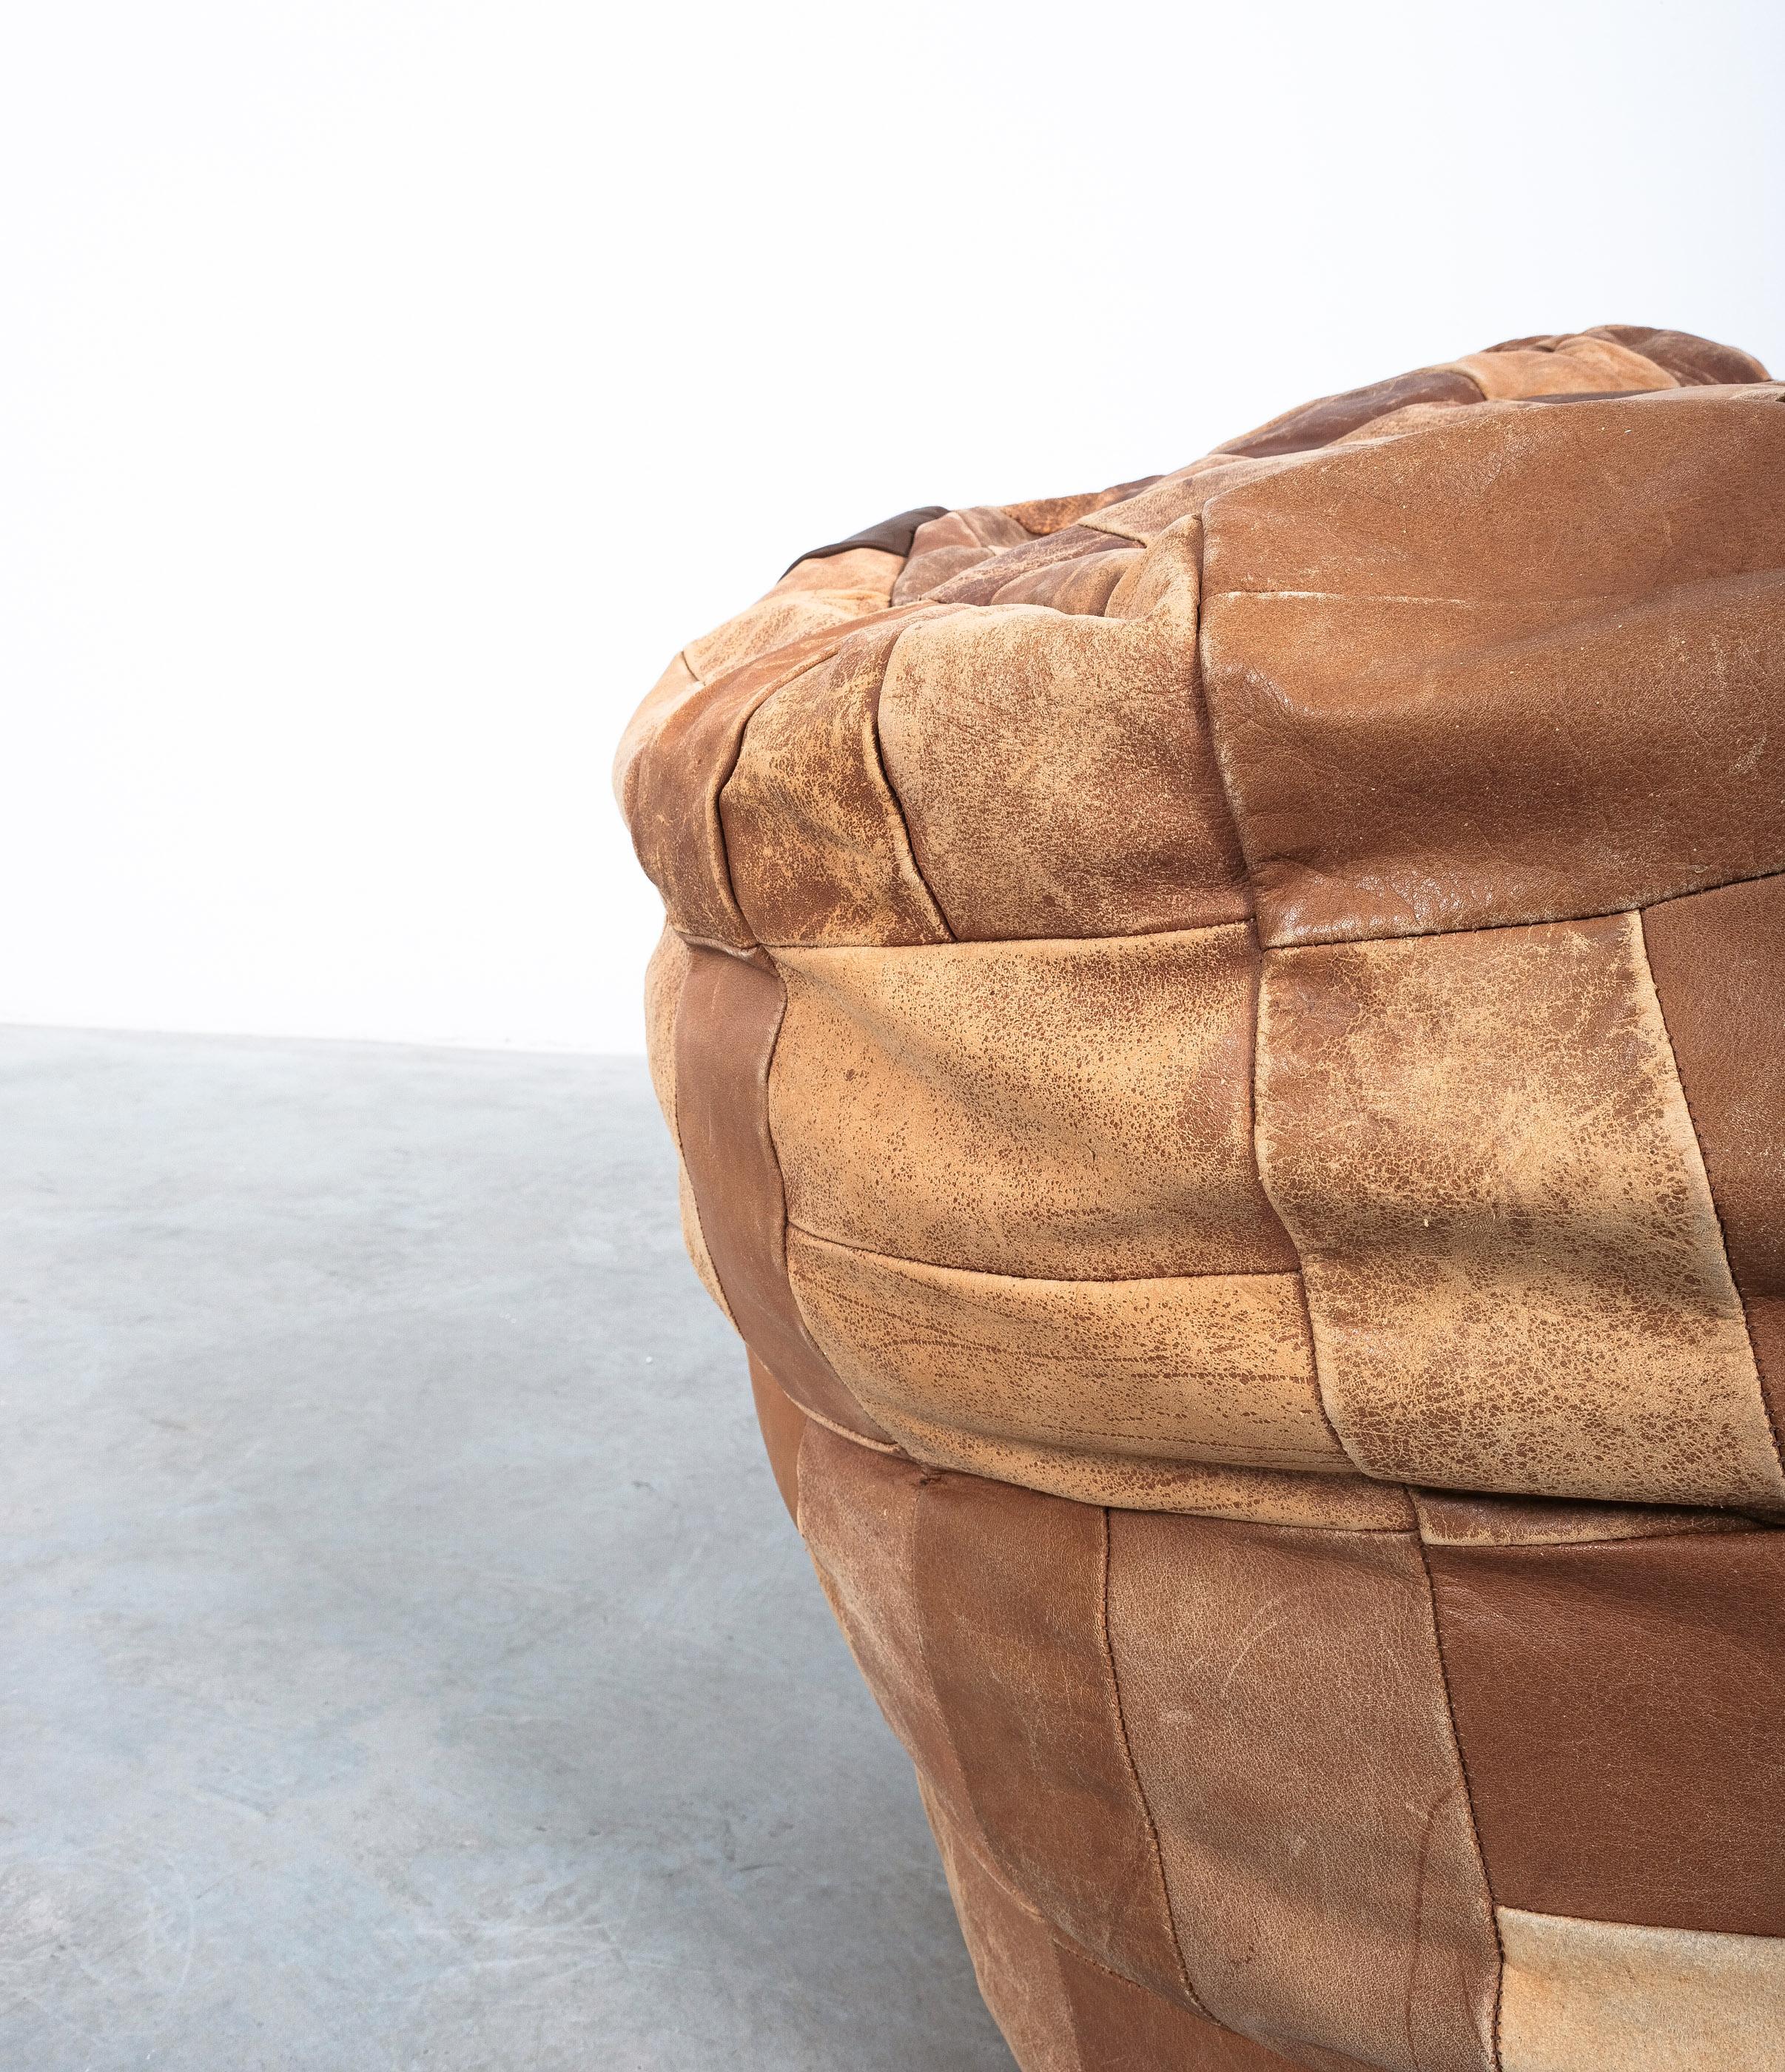 Swiss Brown Leather Patina Patchwork Bean Bag or Pouf, Attr. De Sede 1970 For Sale